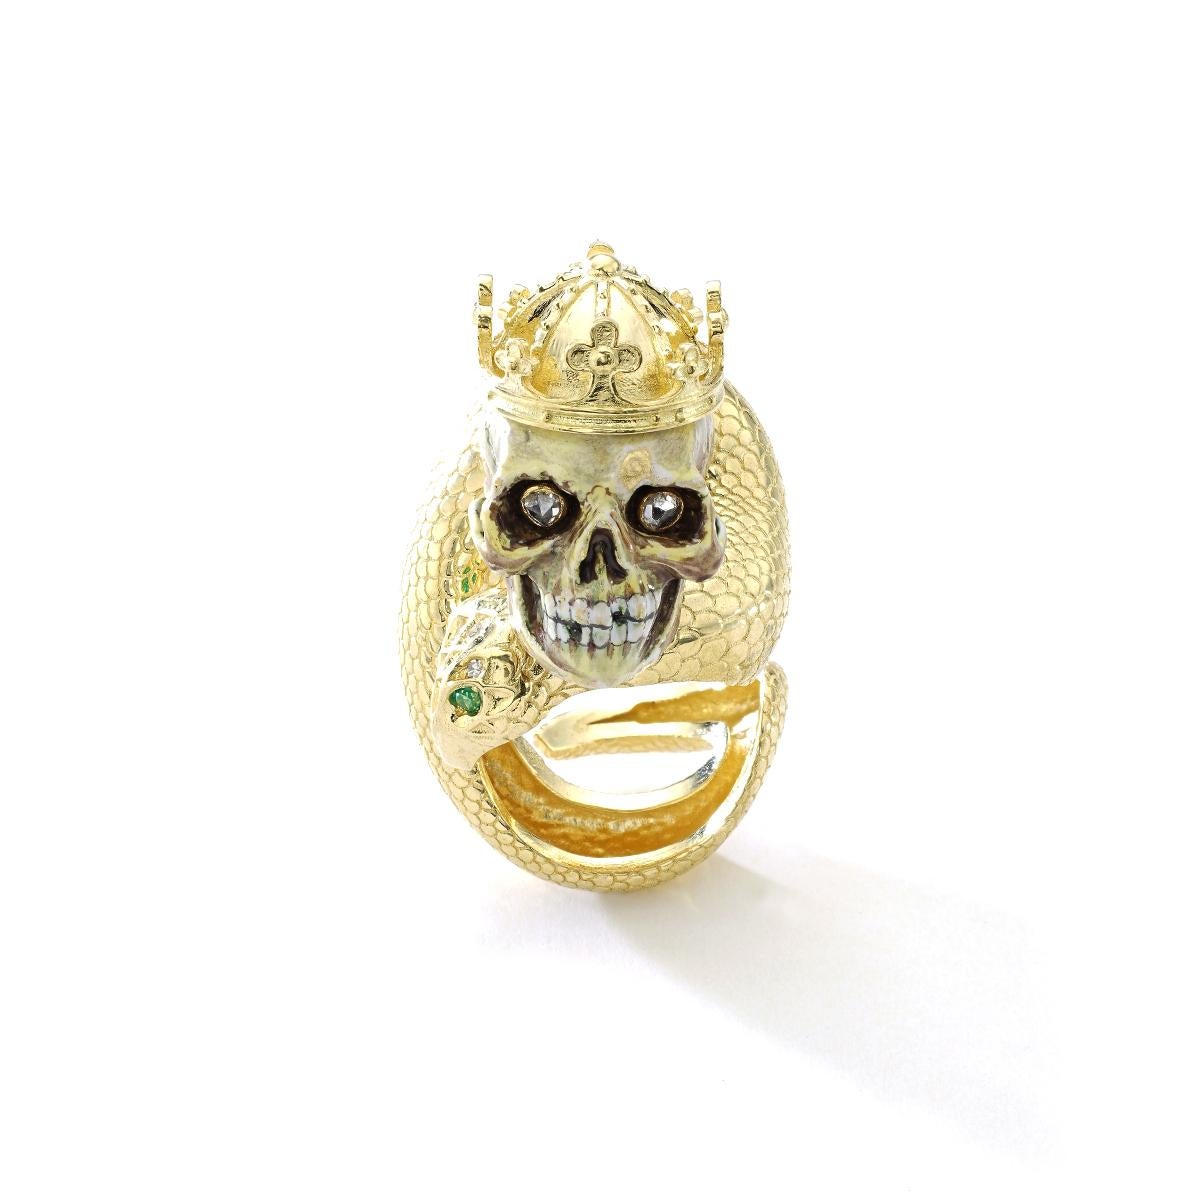 The skull is antique circa 19th Century incredibly enameled on gold. The eyes are Diamond rose cut.
It is magnificently adapted on a Snake yellow gold 18k ring mounting, the head with diamonds and emerald eyes and a Crown yellow gold 18k.
A real